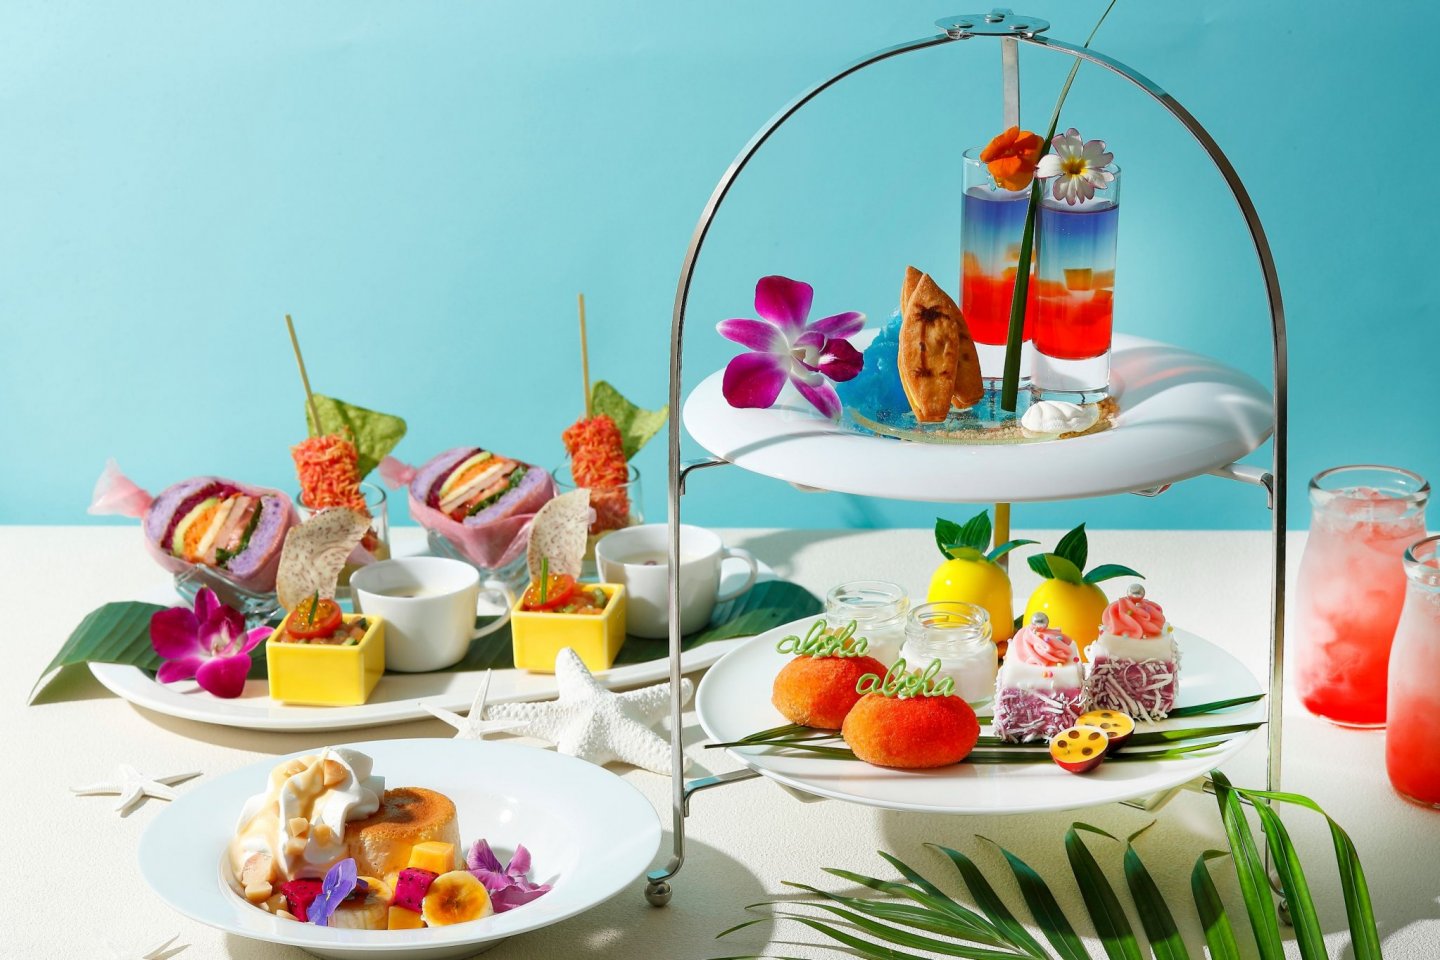 A range of Hawaiian-themed sweet and savory eats will be served at the afternoon tea